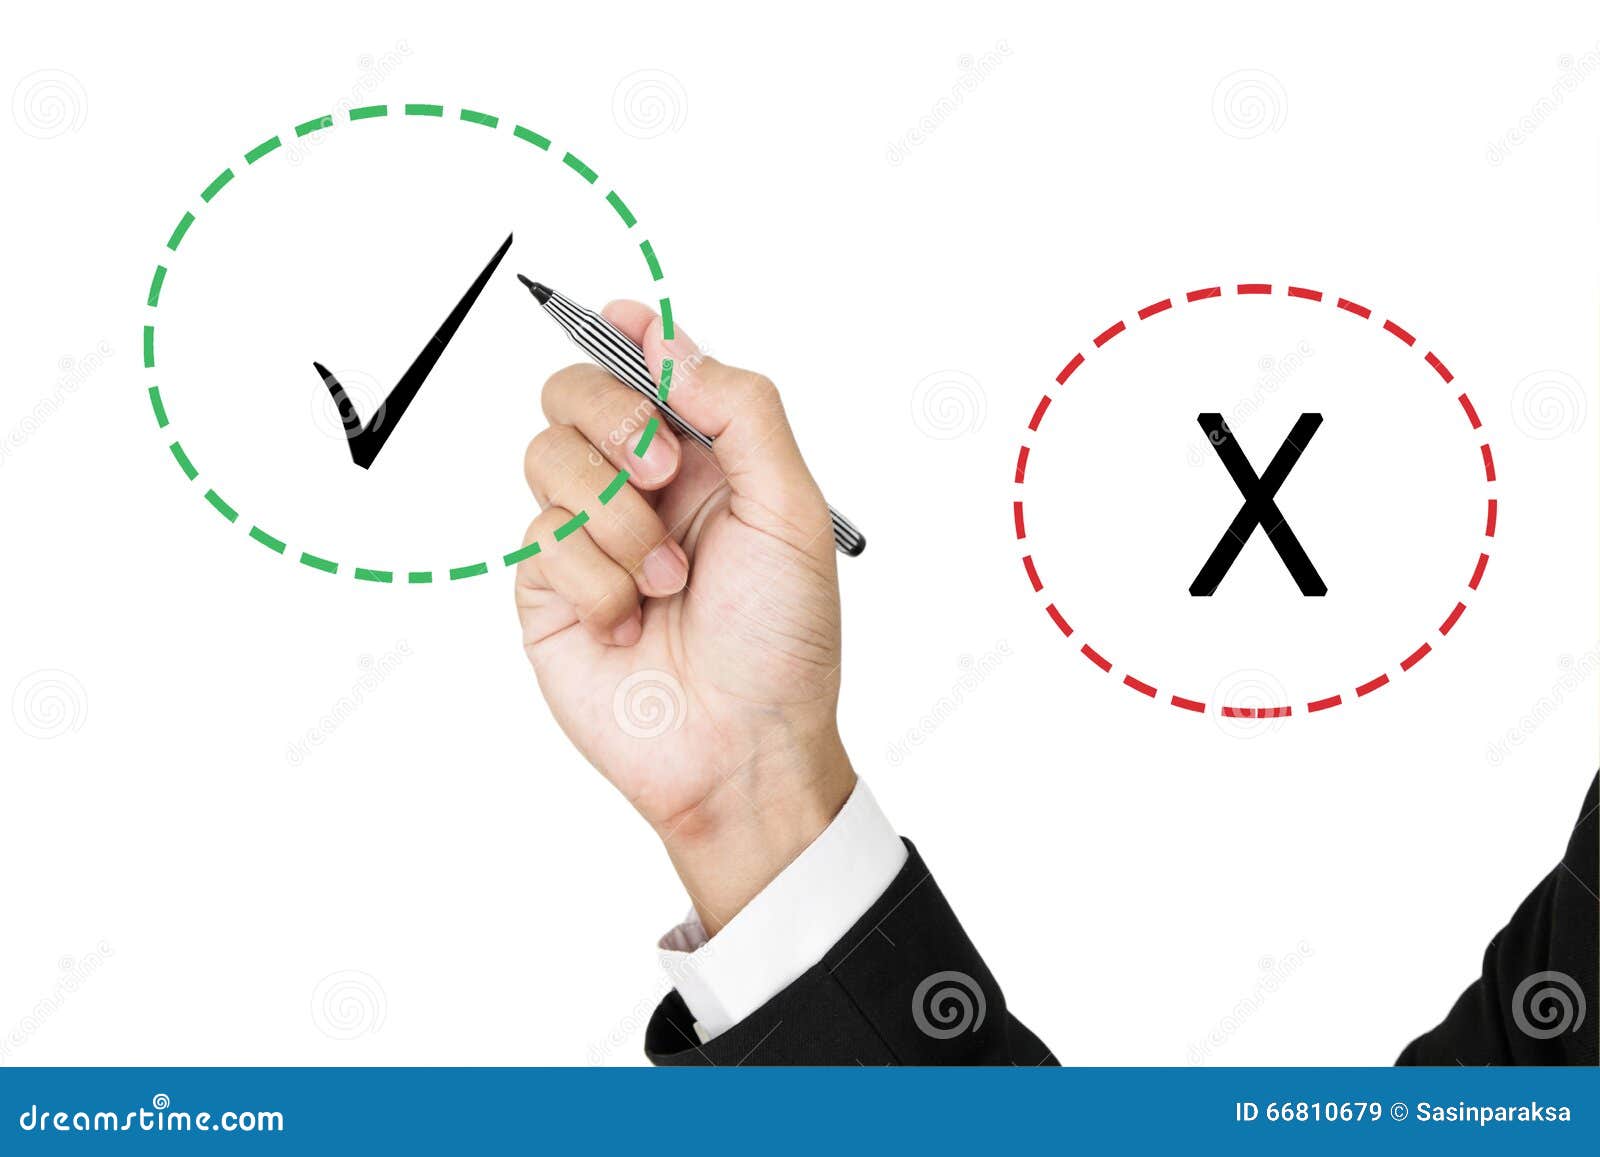 businessman holding pen choosen between correct and incorrect marks,  on white background